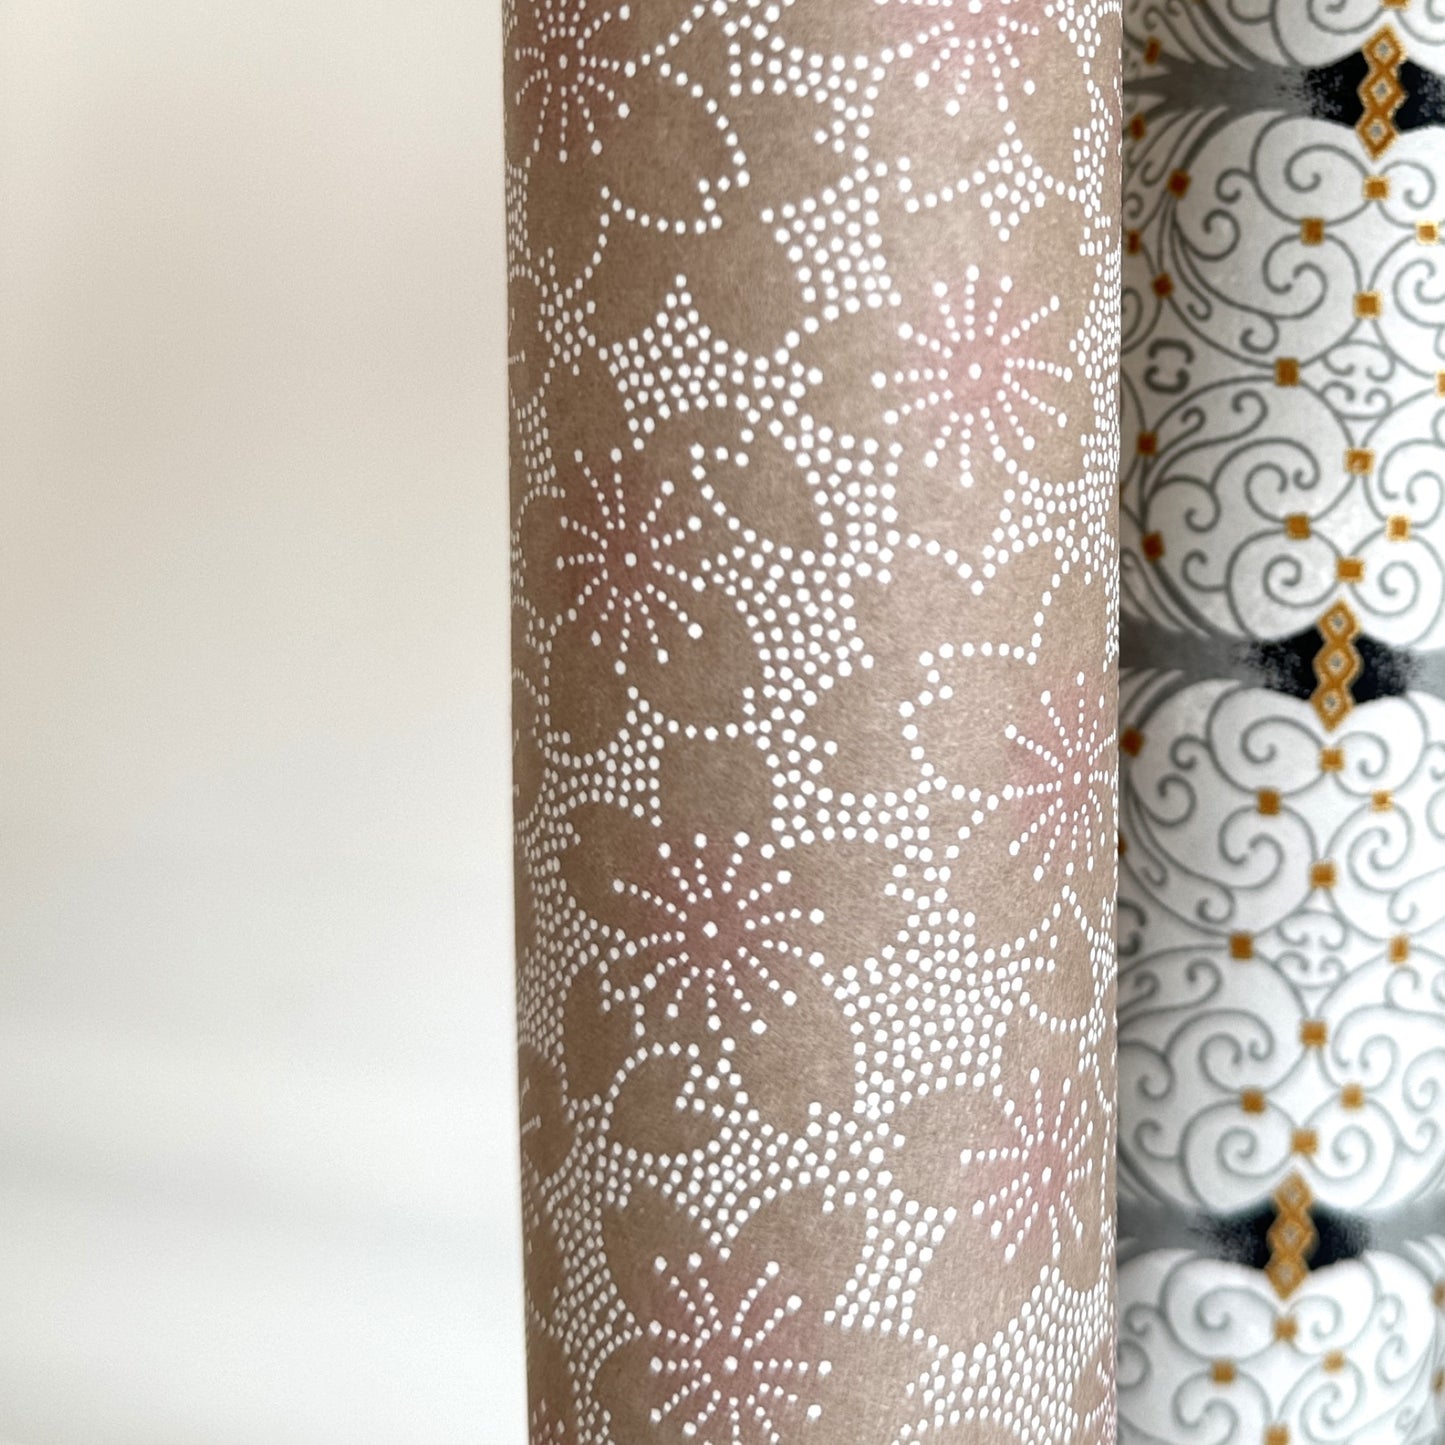 Japanese silkscreen chiyogami paper with a repeat pattern of cherry blossom flowers in taupe and white, close up